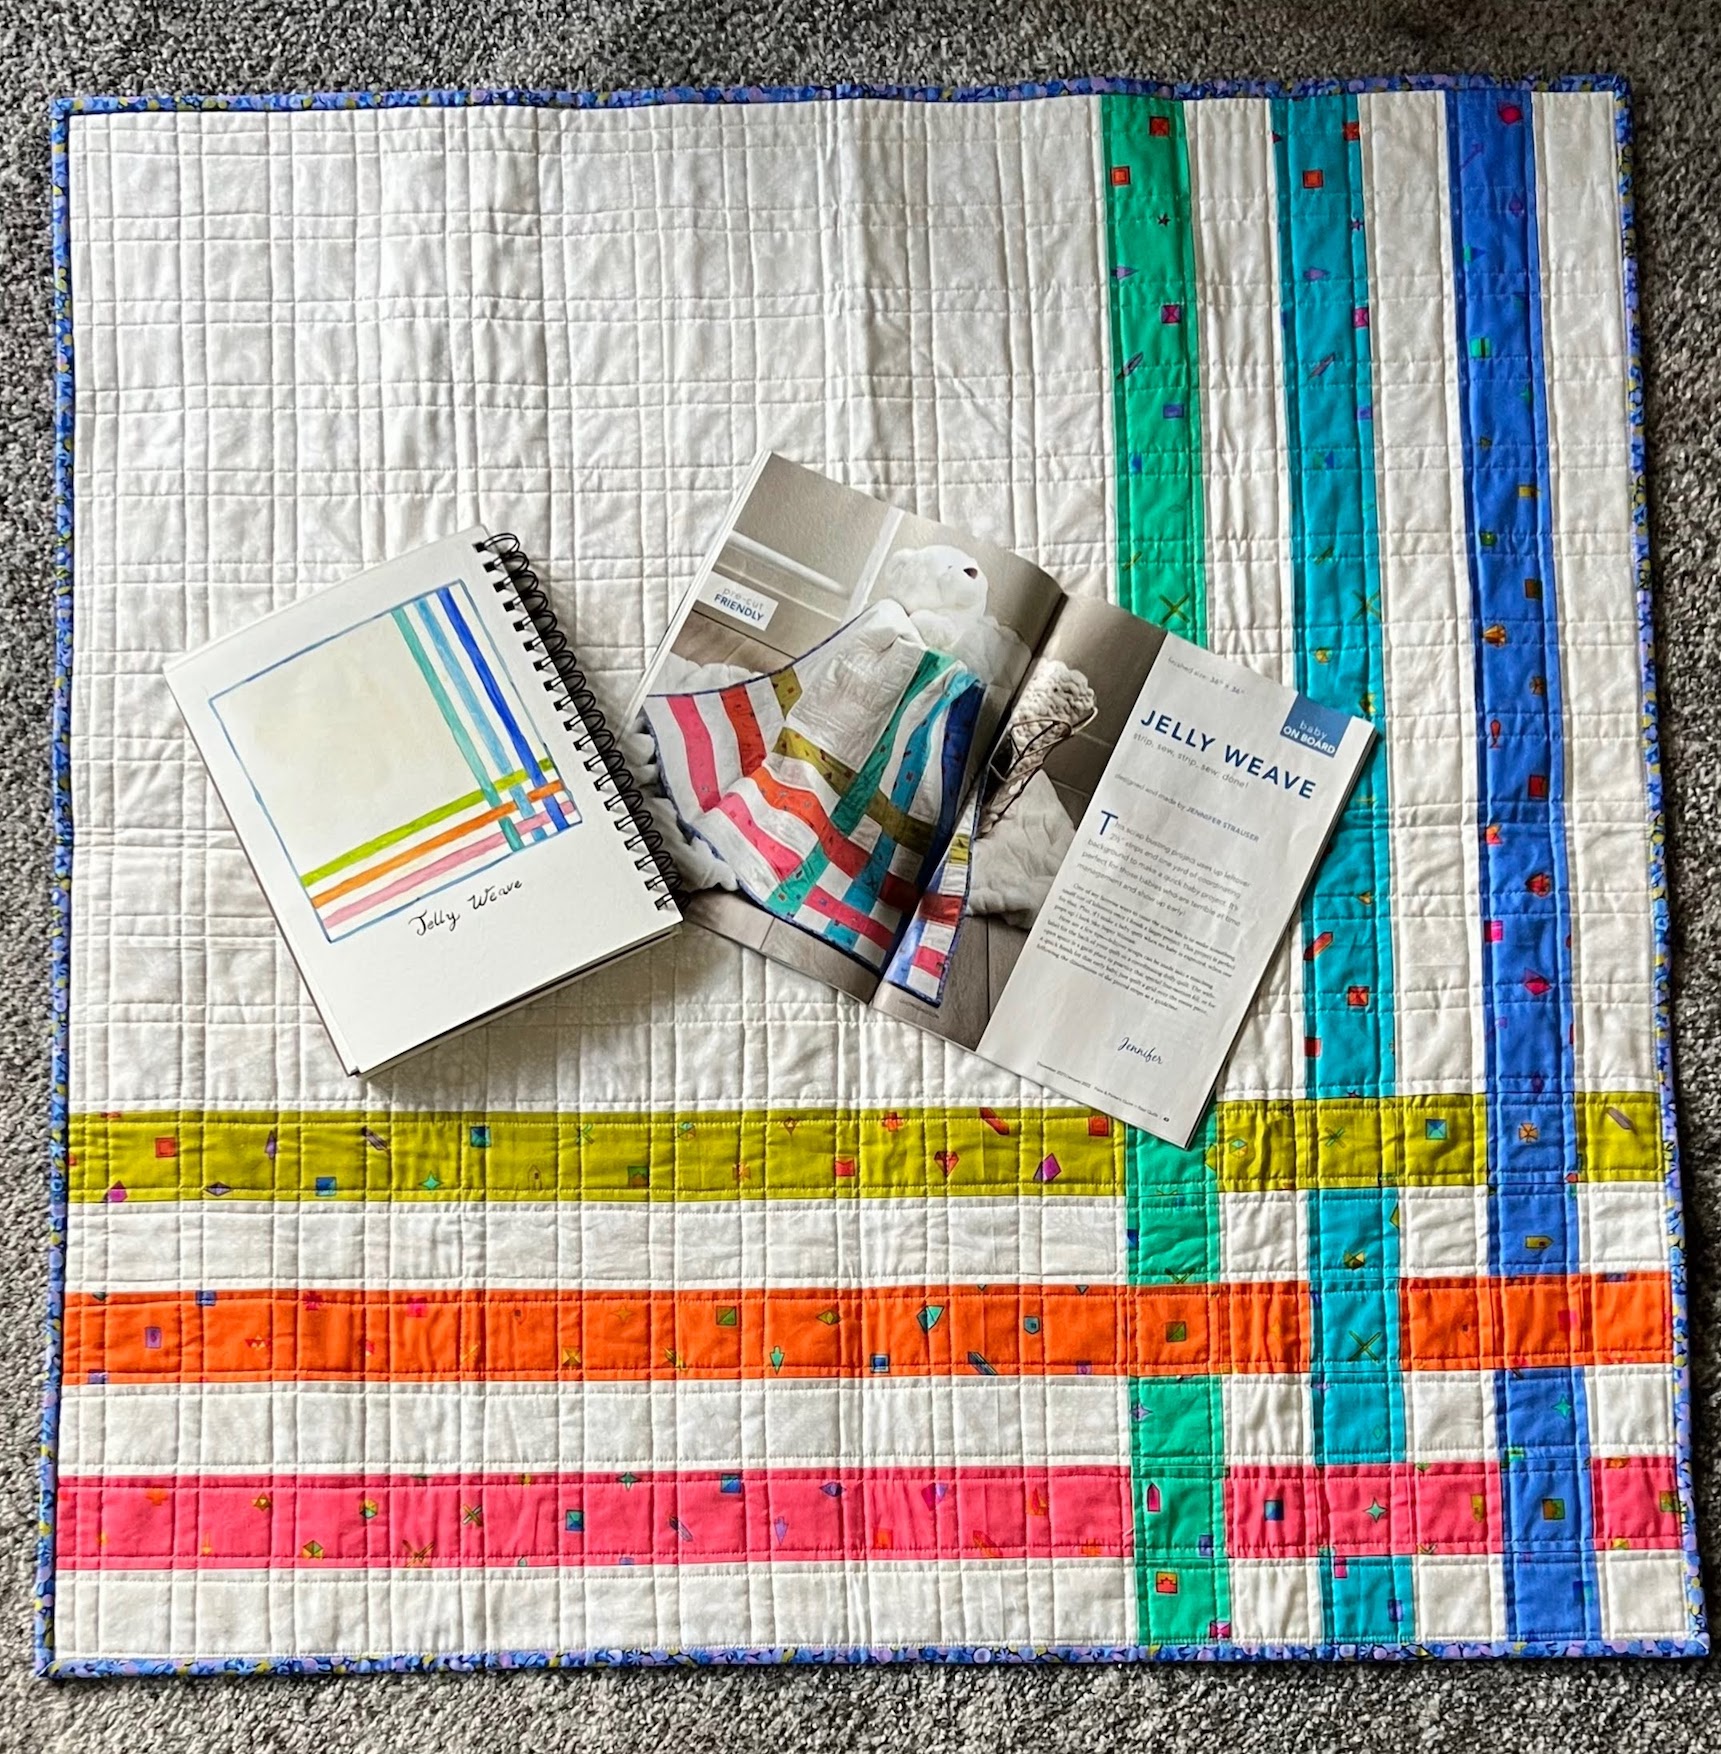 Quilt as you Go Strip Quilt  Jelly roll quilt patterns, Strip quilts, Easy  quilts